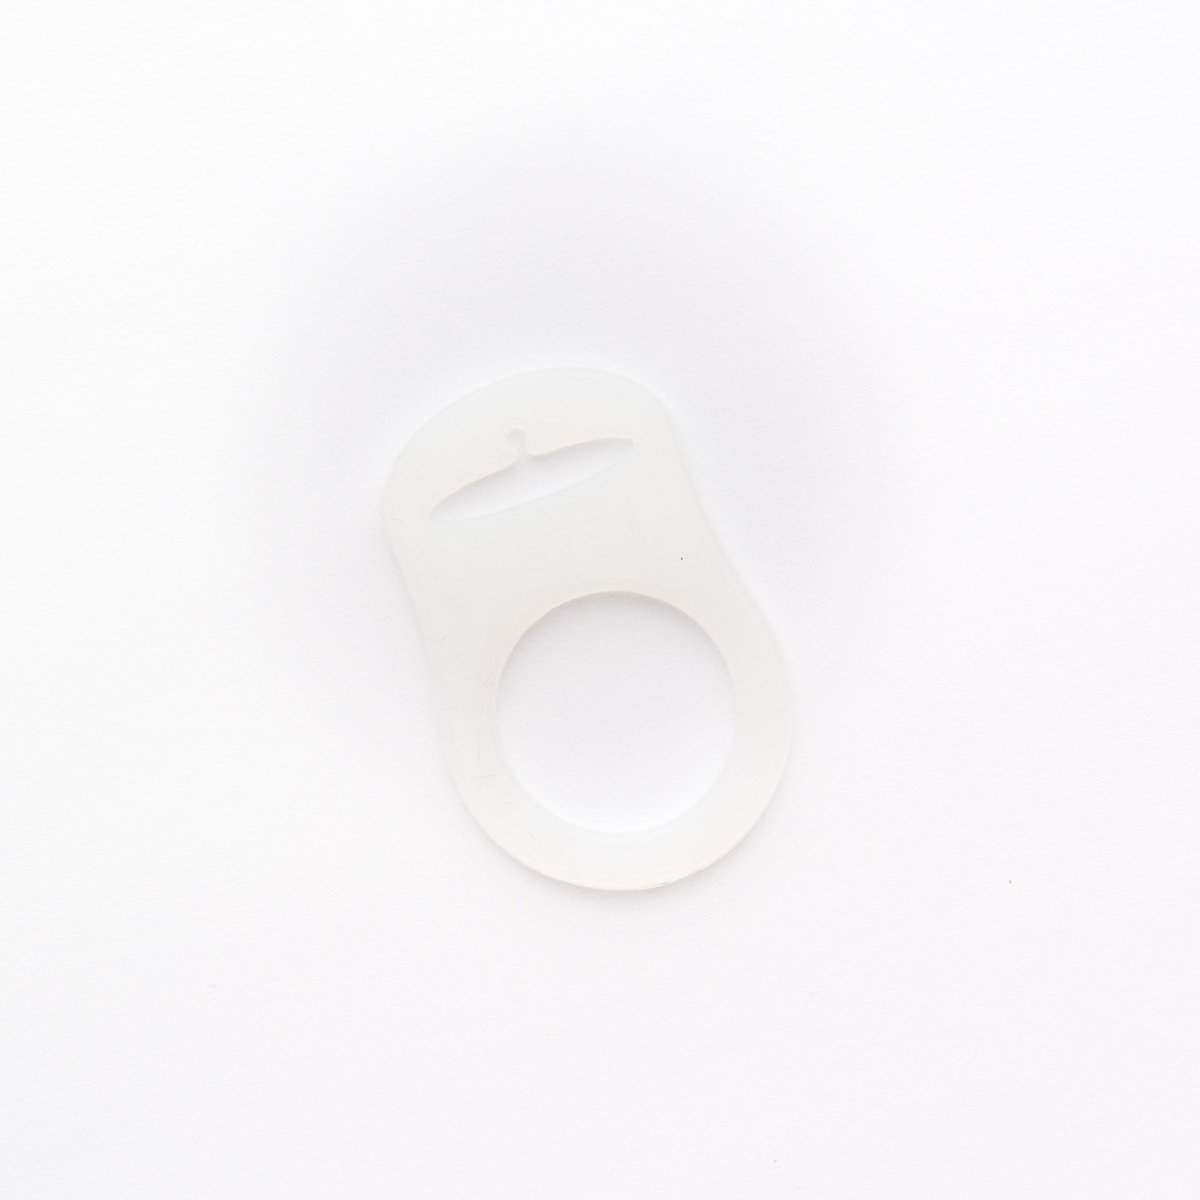 Pacifiers MAM Pacifier Attachment White from Cara & Co Craft Supply